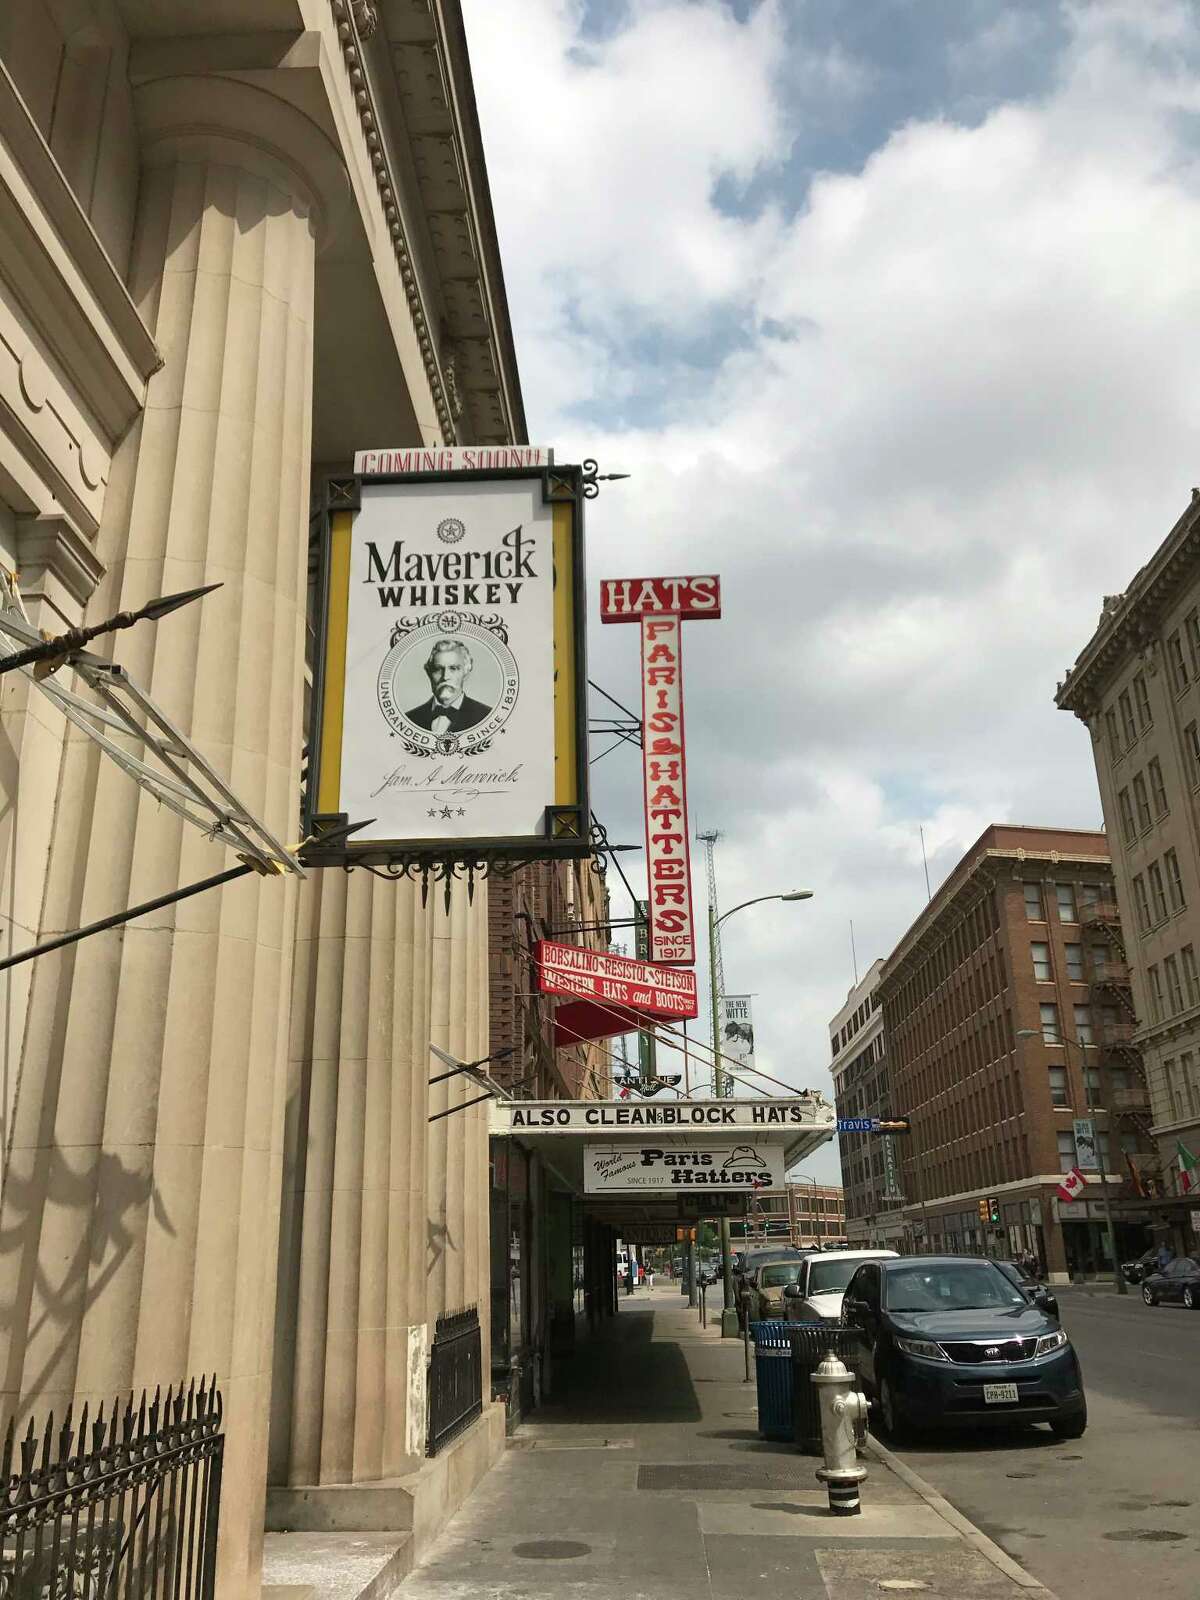 A sign tantalizes downtowners with the news that Maverick Whiskey is coming soon. The sign hangs over the old Antiques on Broadway space, right next door to the famous Paris Hatters shop.